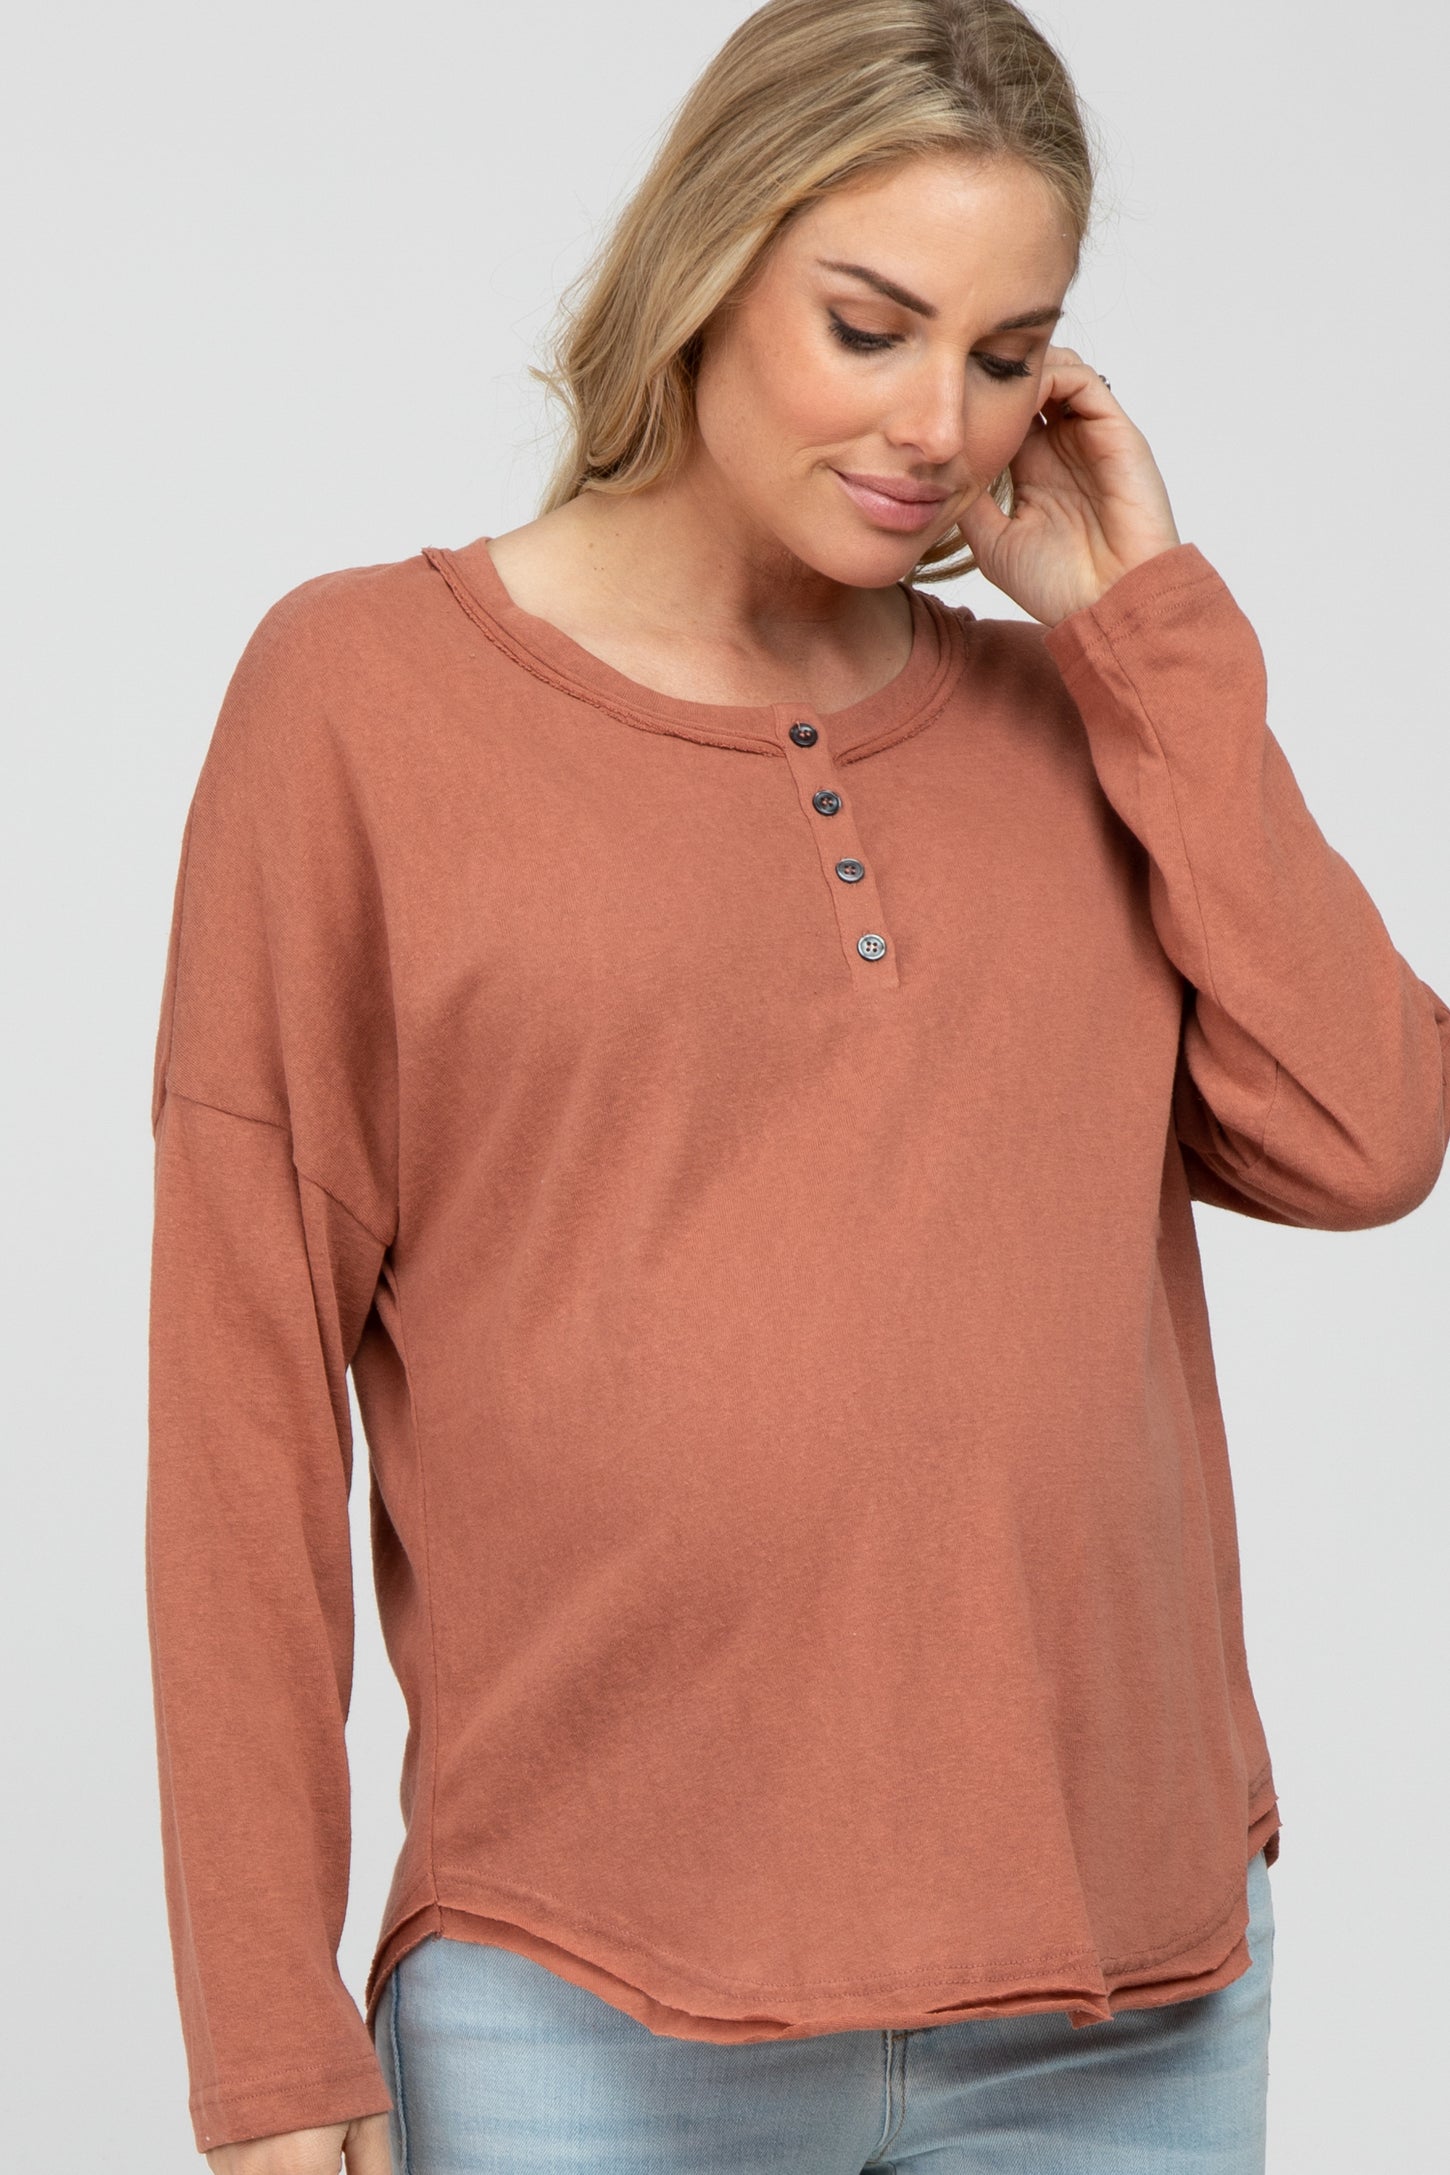 Rust Button Front Raw Edge Maternity Top